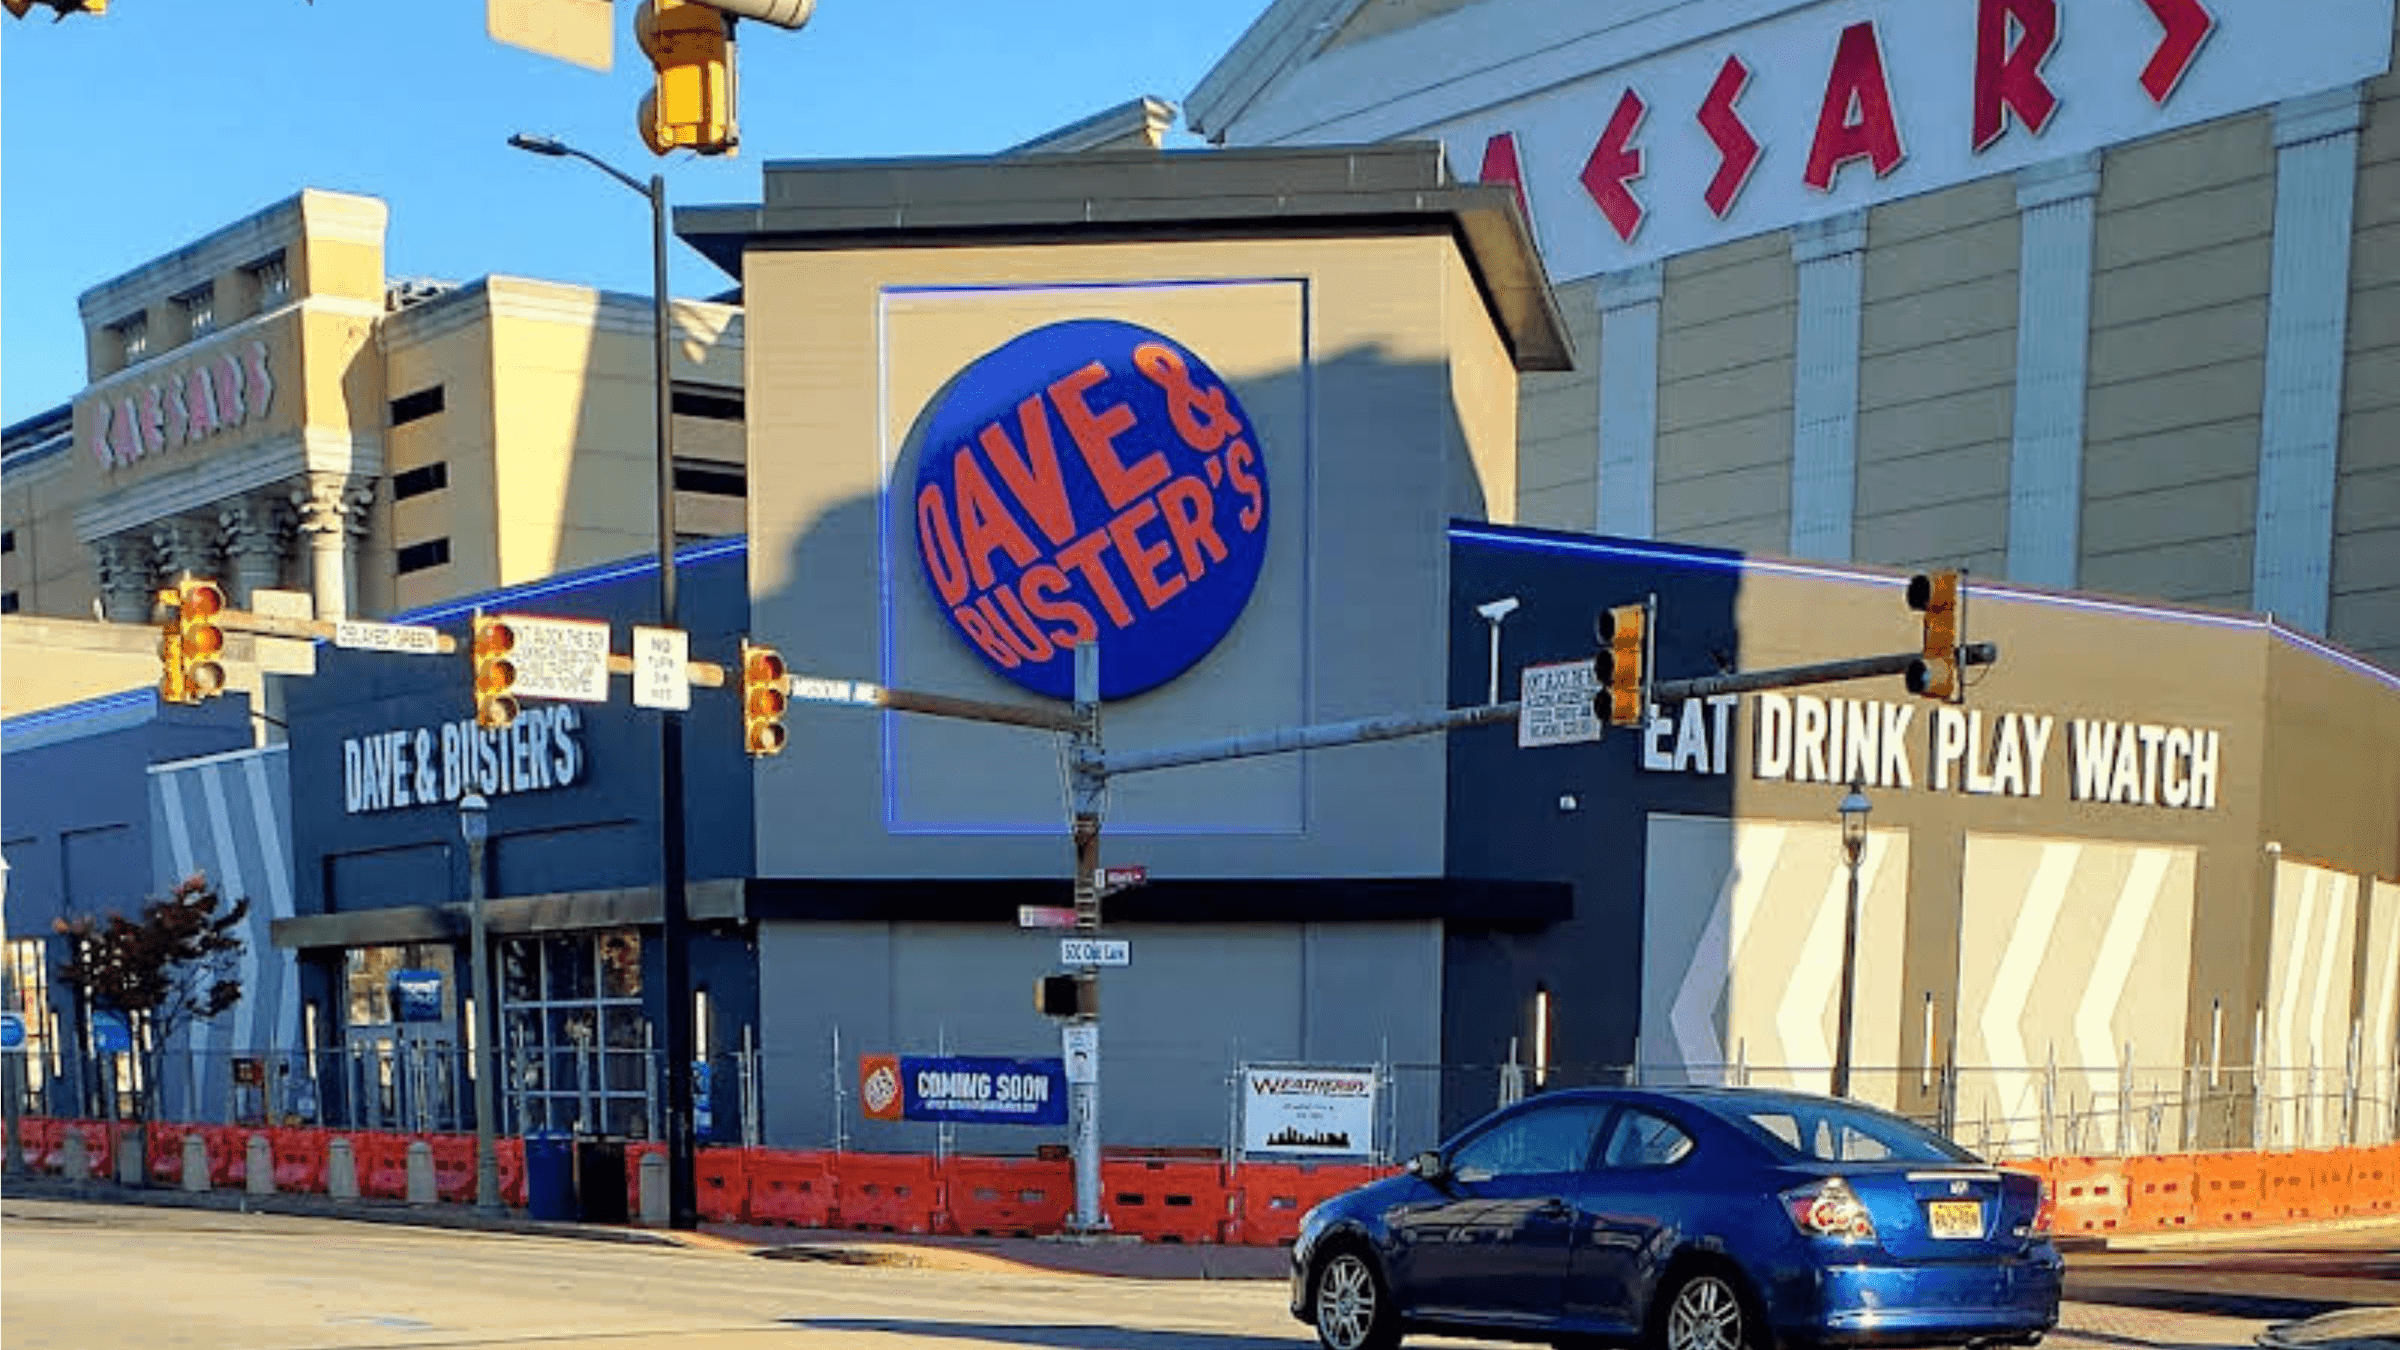 Dave & Buster's Atlantic City Grand Opening Announced